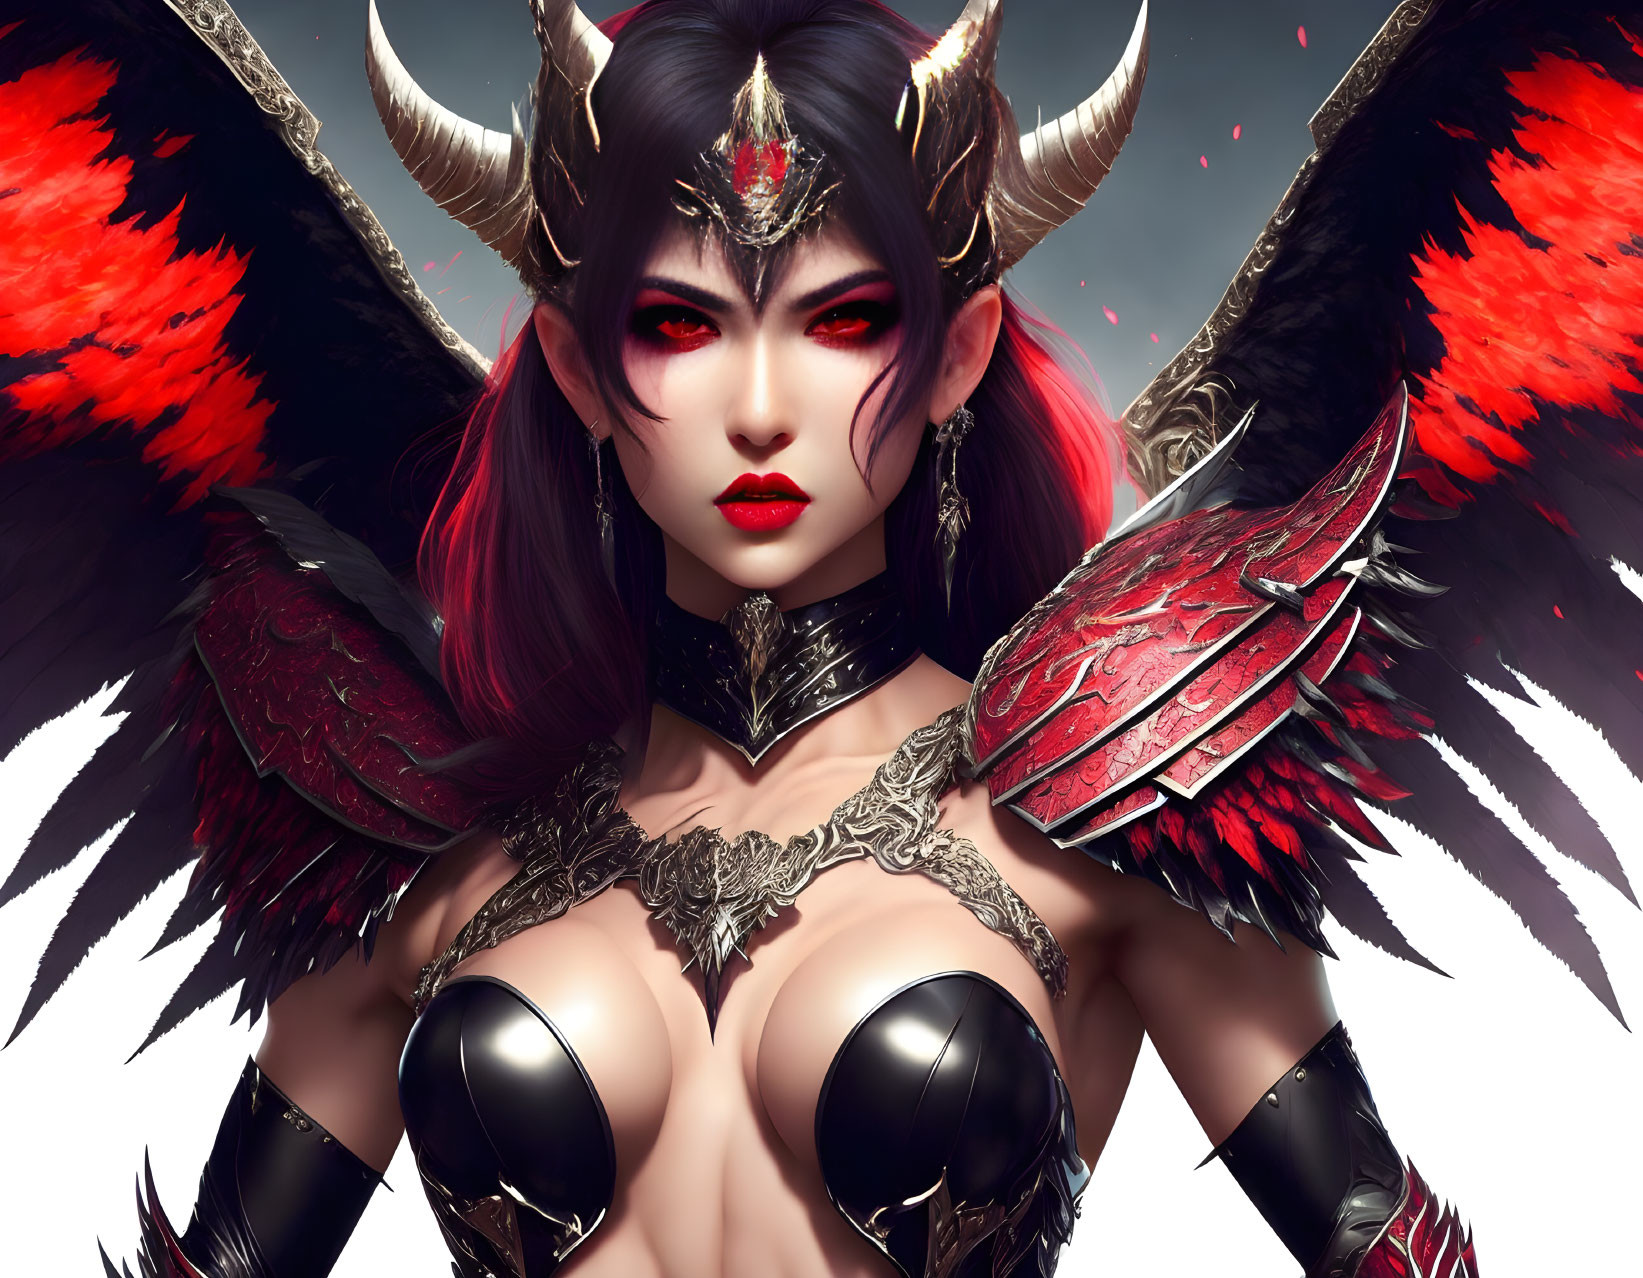 Female character with red eyes, horns, dark wings, and fiery armor illustration